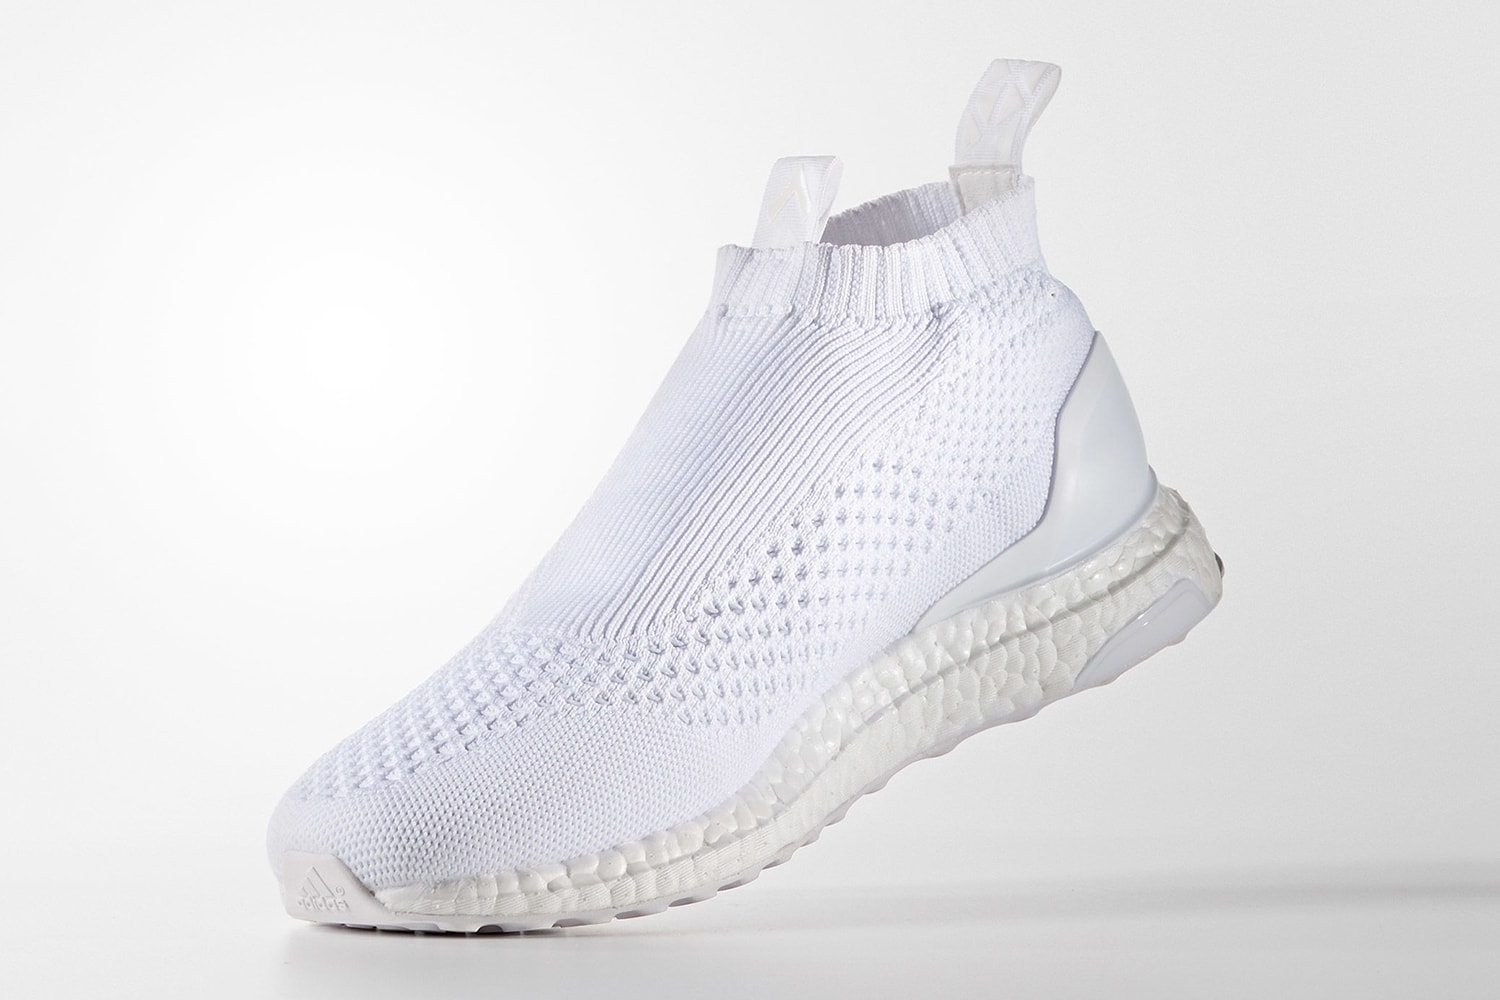 adidas ACE 16+ PureControl UltraBOOST "Triple White"